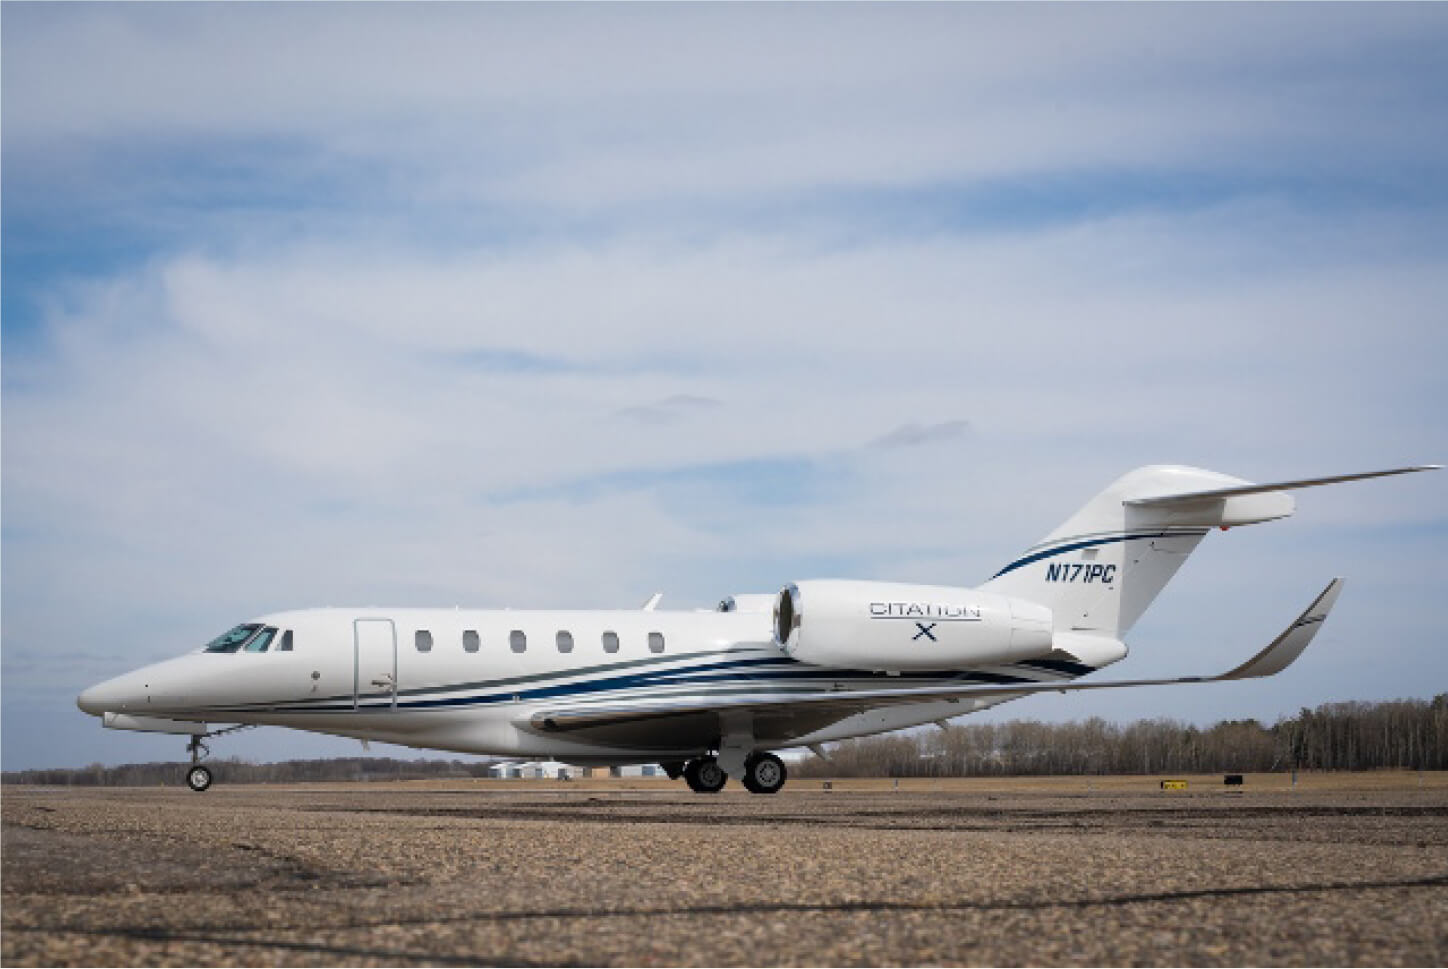 Citation X Model Plain in White Color on an Open Field